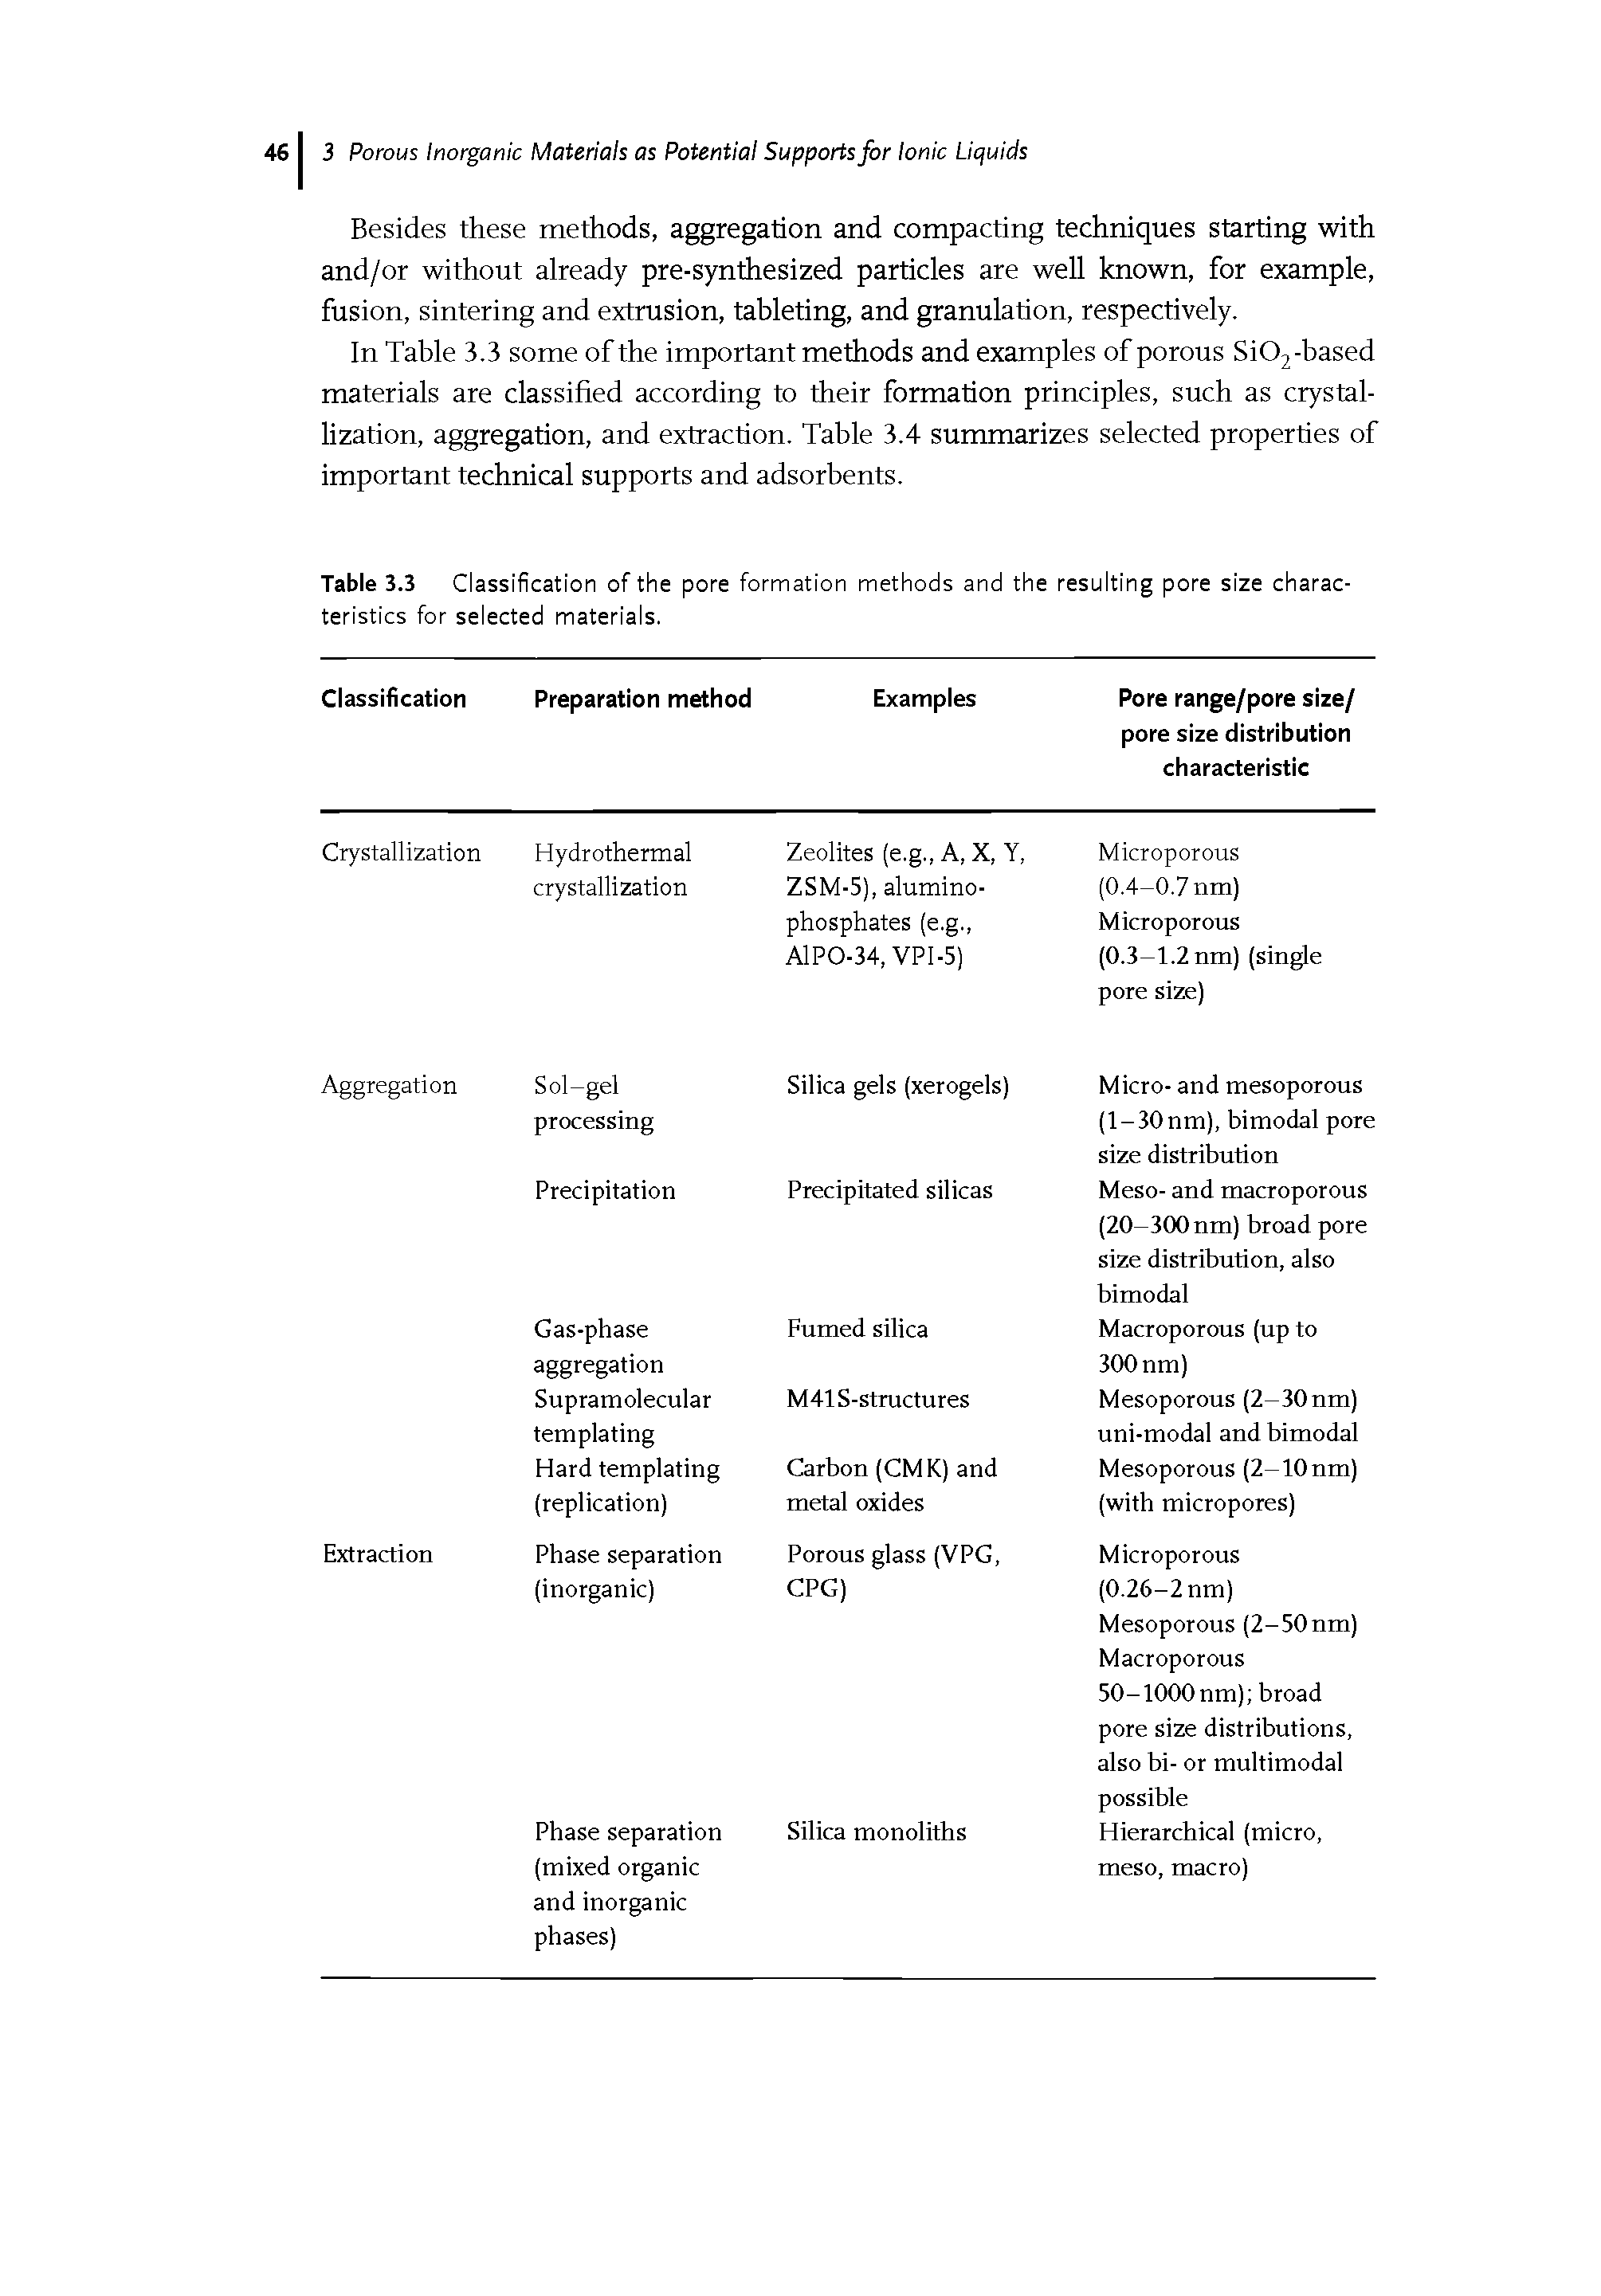 Table 3.3 Classification of the pore formation methods and the resulting pore size characteristics for selected materials.